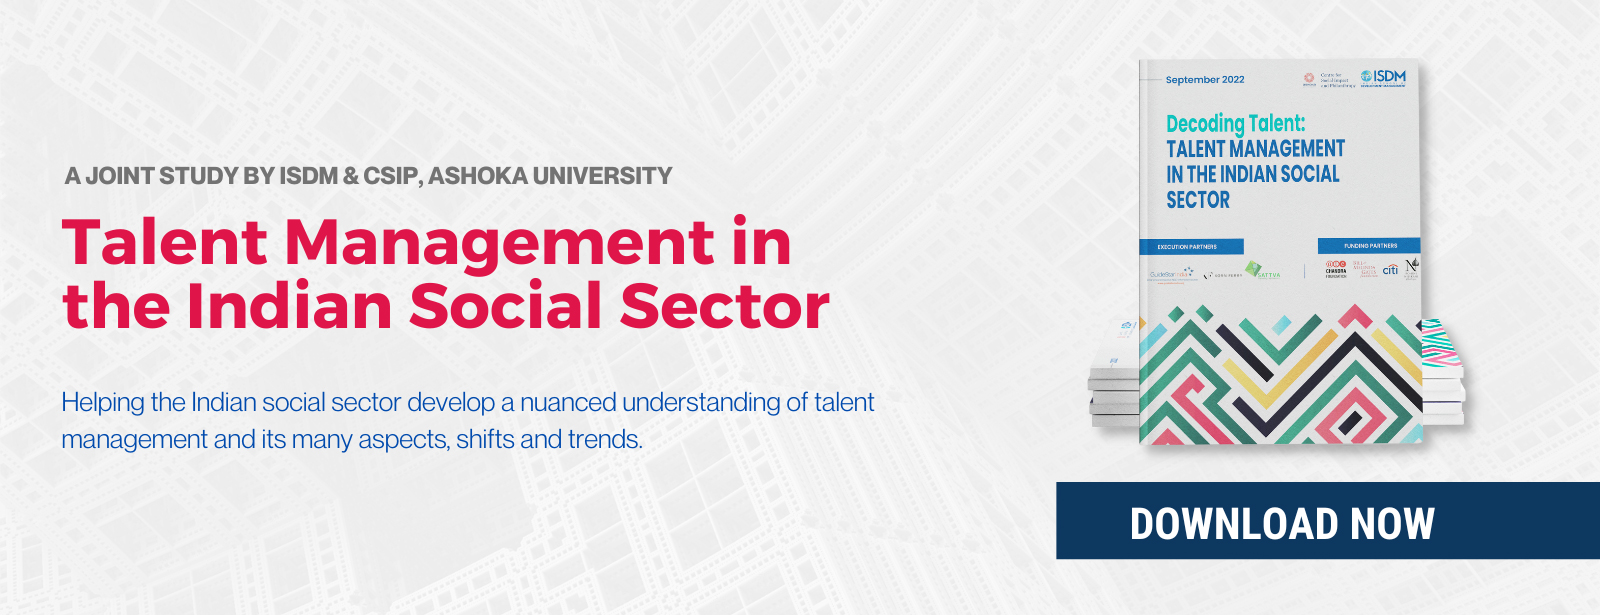 Decoding Talent: Talent Management in the Indian Social Sector Image